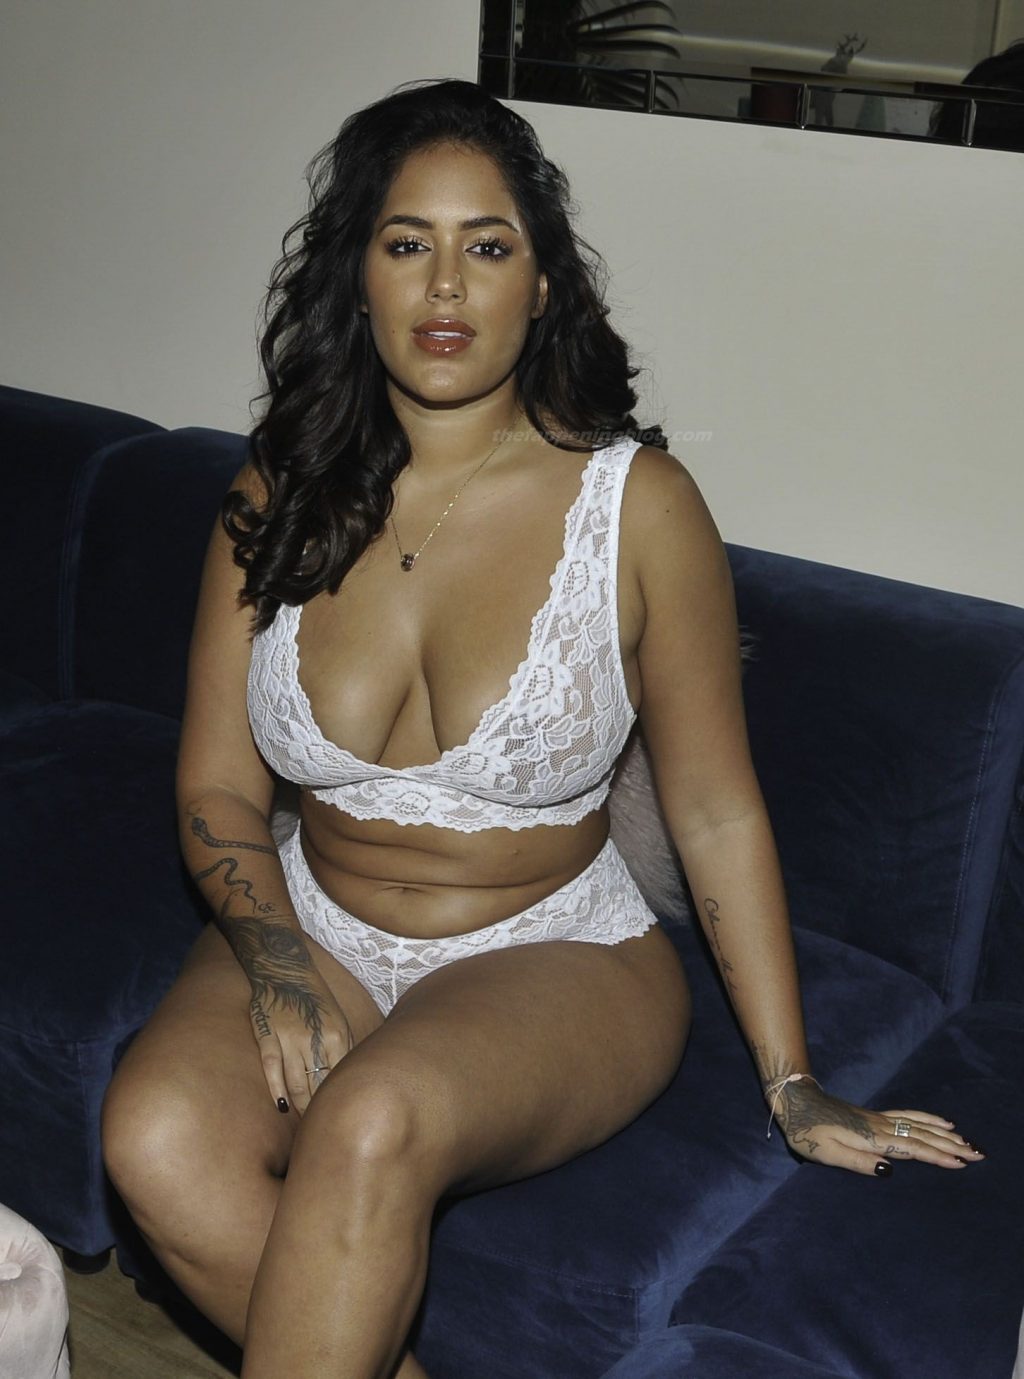 Malin Andersson Shows Off Her Figure In White Lingerie (21 Photos)